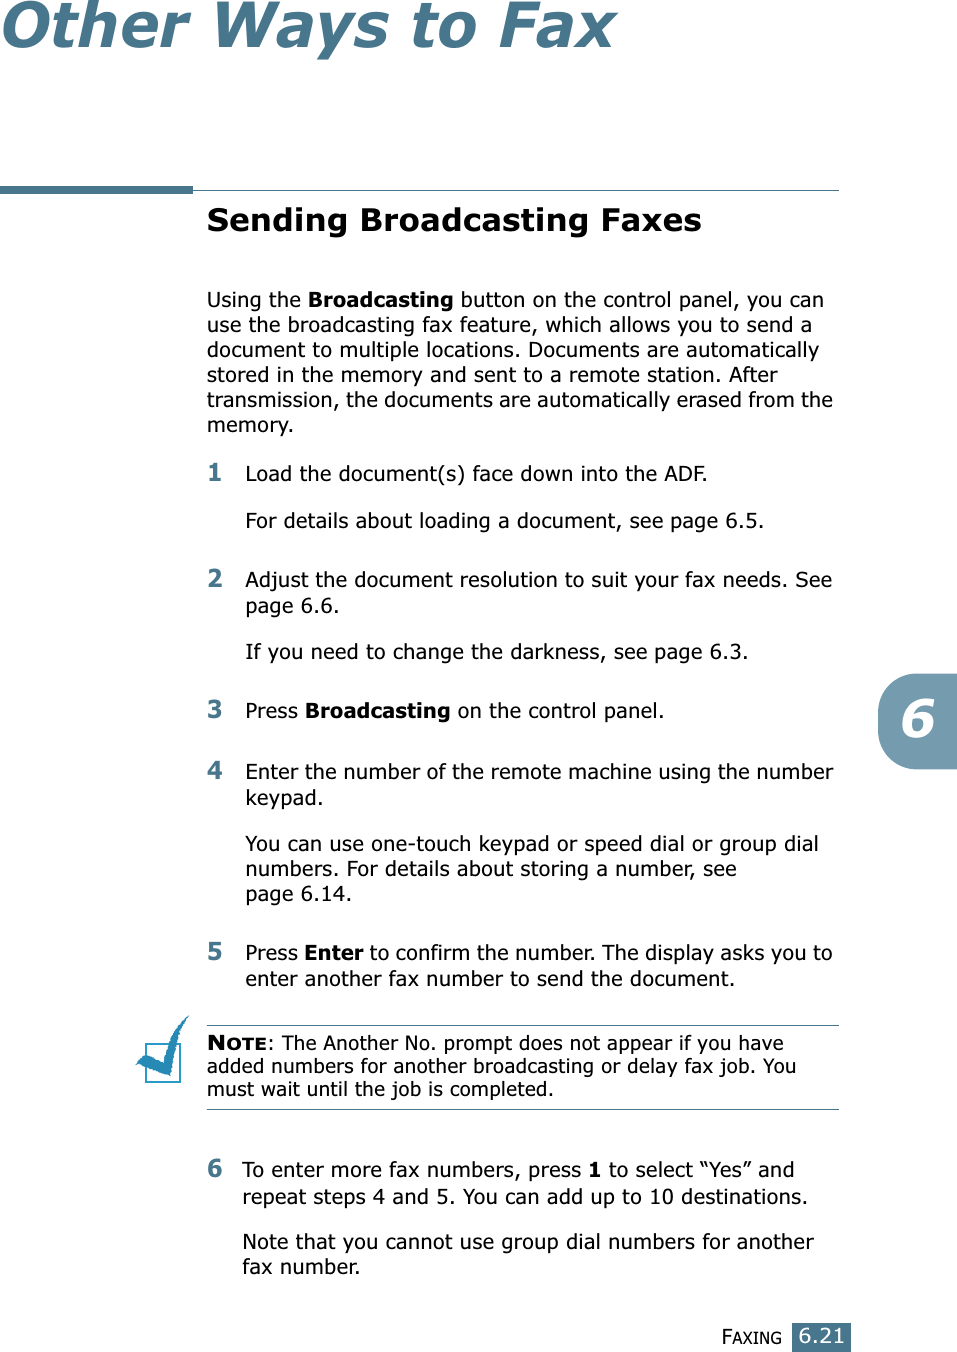 FAXING6.216Other Ways to FaxSending Broadcasting FaxesUsing the Broadcasting button on the control panel, you can use the broadcasting fax feature, which allows you to send a document to multiple locations. Documents are automatically stored in the memory and sent to a remote station. After transmission, the documents are automatically erased from the memory.1Load the document(s) face down into the ADF.For details about loading a document, see page 6.5.2Adjust the document resolution to suit your fax needs. See page 6.6.If you need to change the darkness, see page 6.3.3Press Broadcasting on the control panel.4Enter the number of the remote machine using the number keypad.You can use one-touch keypad or speed dial or group dial numbers. For details about storing a number, see page 6.14.5Press Enter to confirm the number. The display asks you to enter another fax number to send the document.NOTE: The Another No. prompt does not appear if you have added numbers for another broadcasting or delay fax job. You must wait until the job is completed.6To enter more fax numbers, press 1 to select “Yes” and repeat steps 4 and 5. You can add up to 10 destinations.Note that you cannot use group dial numbers for another fax number.